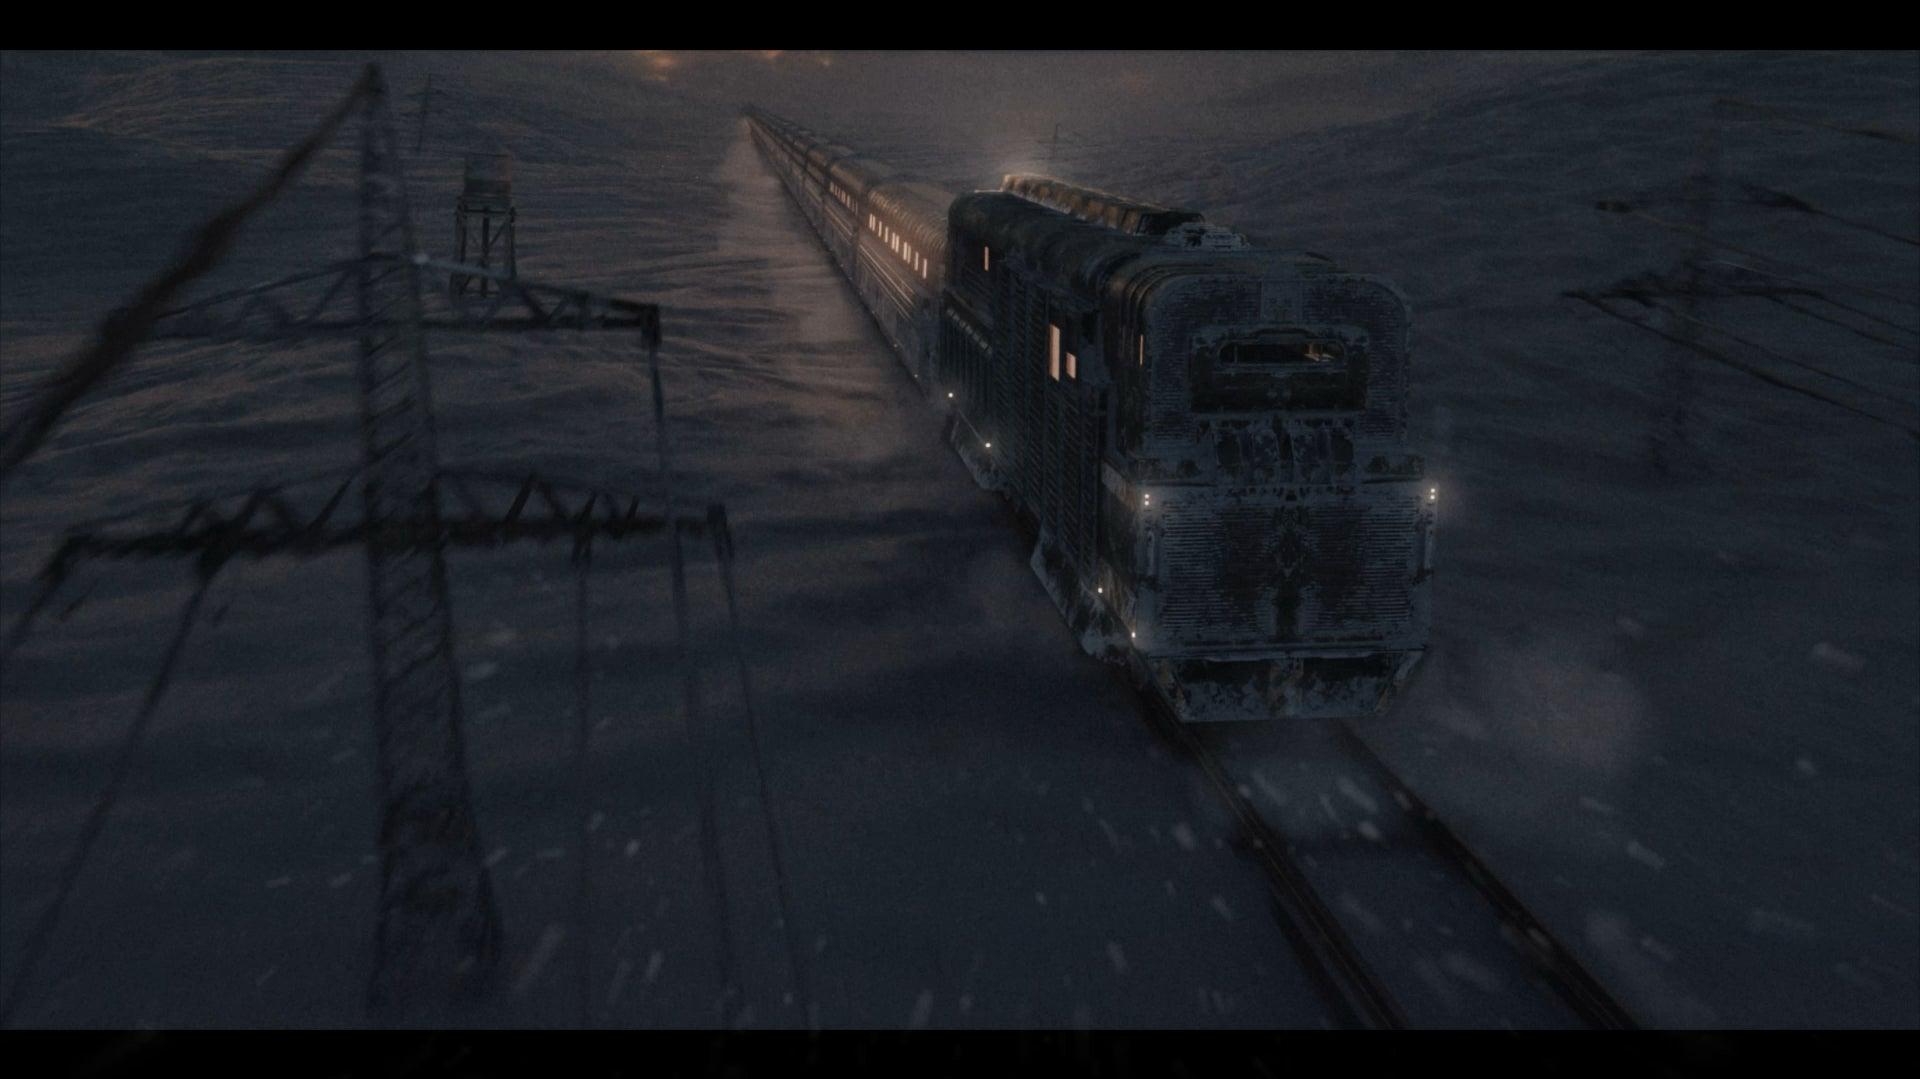 I Animated The Big Alice Train From Snowpiercer Tv Series R